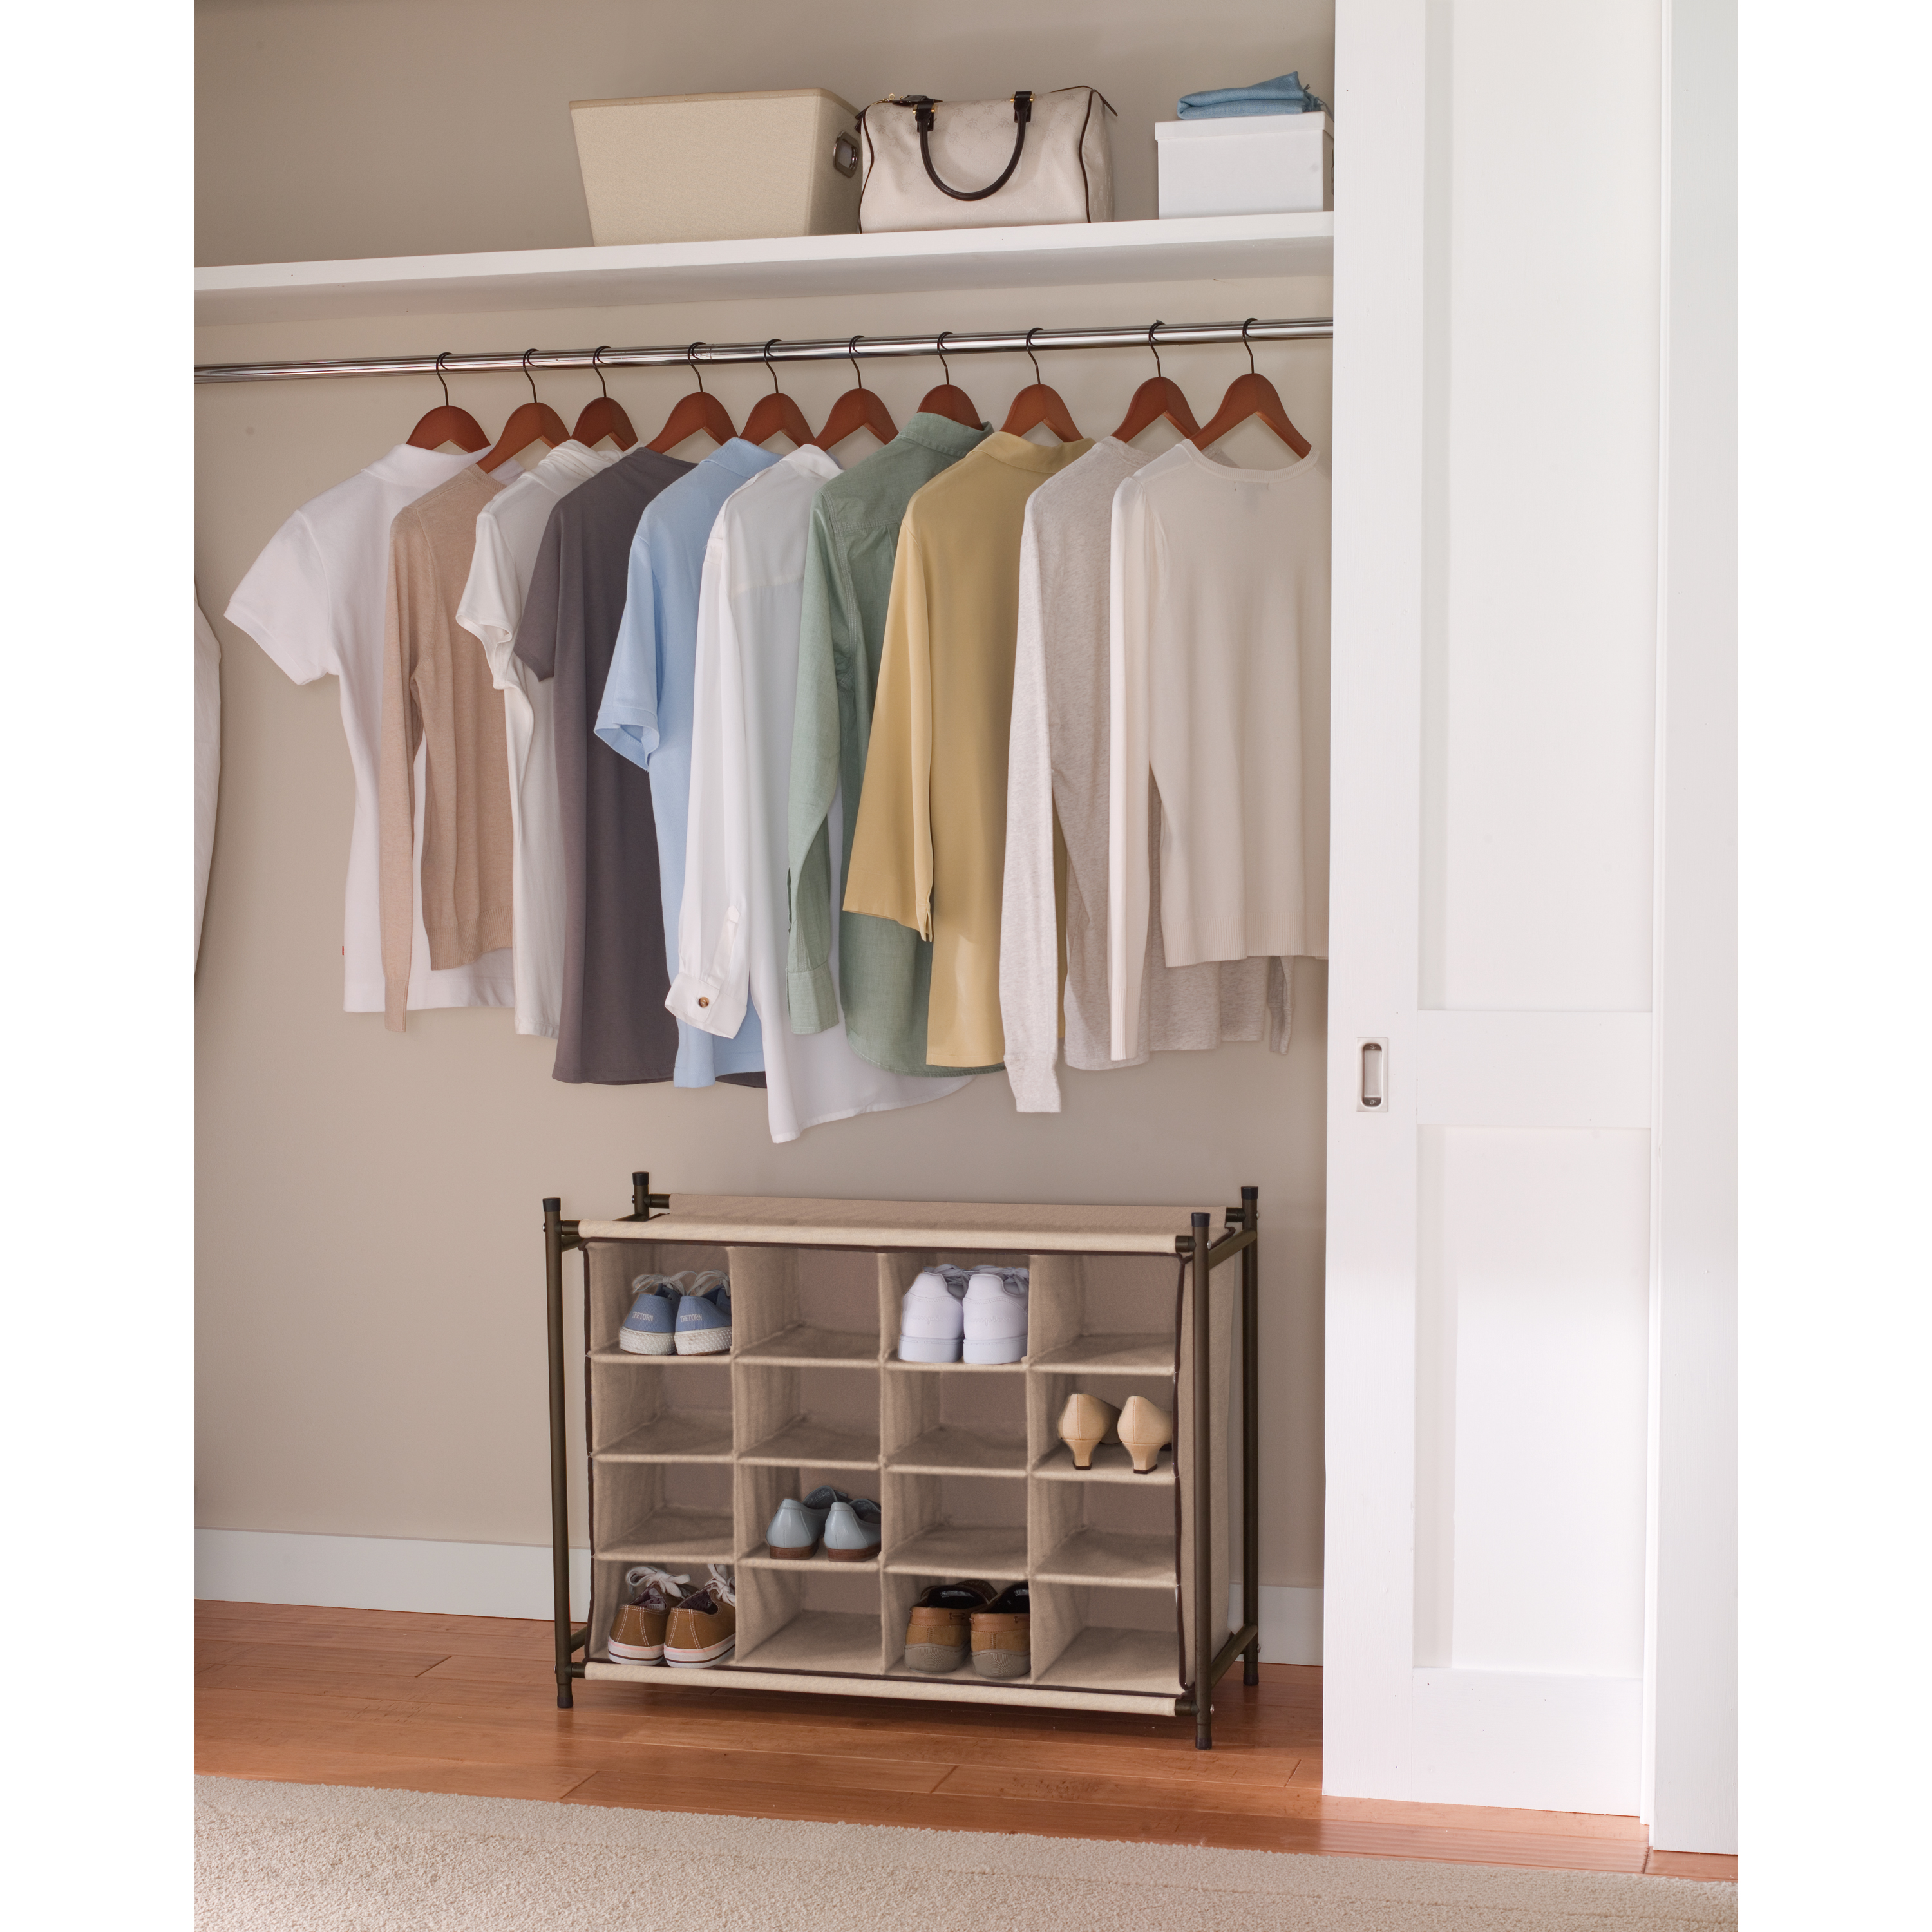 Better Homes and Gardens 16-Pair Shoe Organizer, Fresh Ivory - image 1 of 4